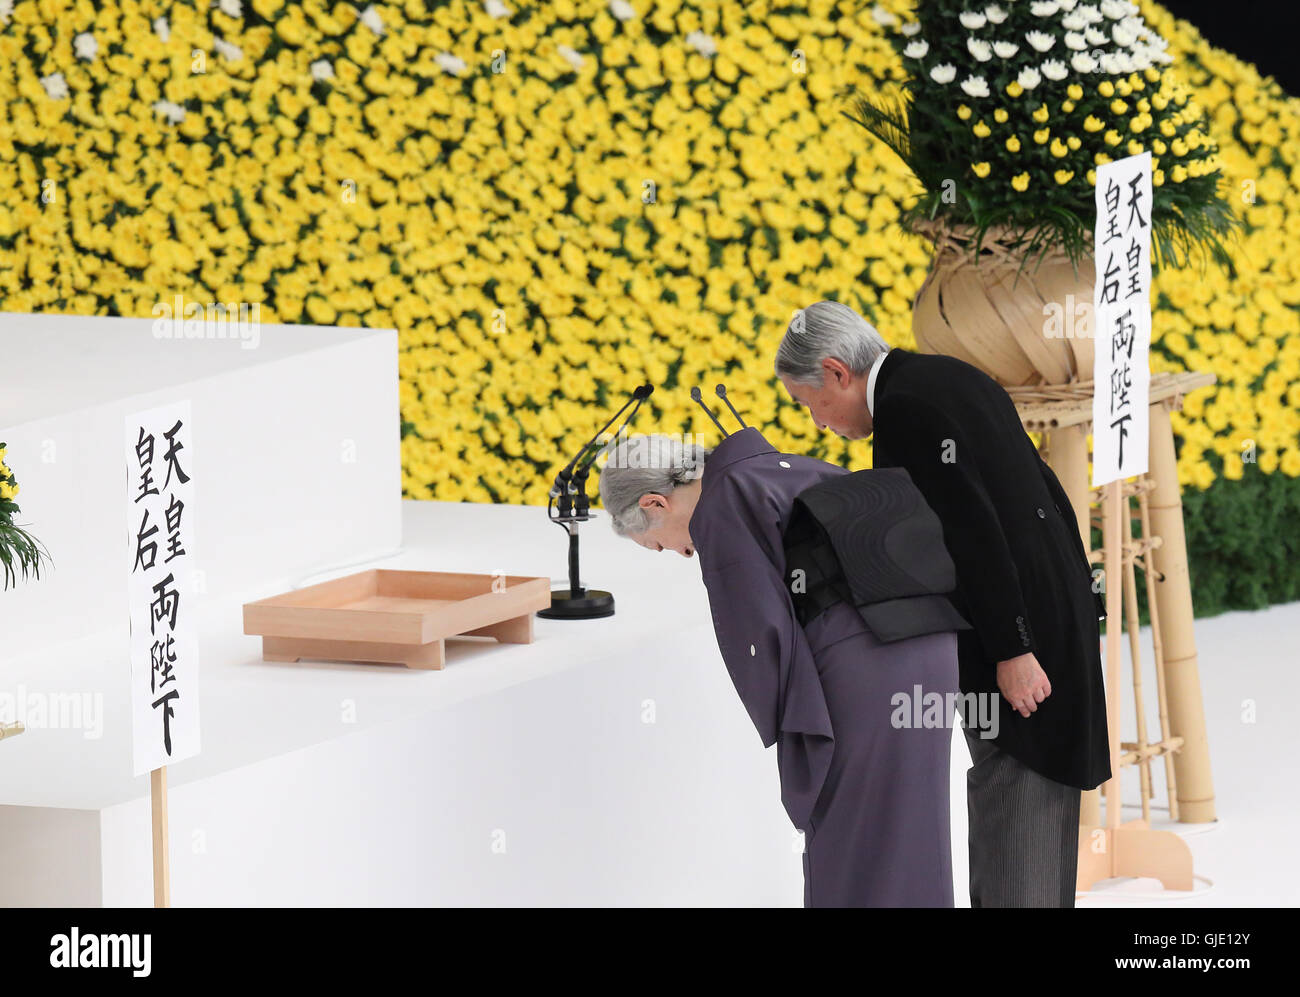 Japanese Emperor Akihito and Empress Michiko attend the official annual memorial service for war victims of the 71st anniversary of the end of the World War II at Nippon Budokan, Tokyo, Japan, on 15 Aug 2016. © Motoo Naka/AFLO/Alamy Live News Stock Photo